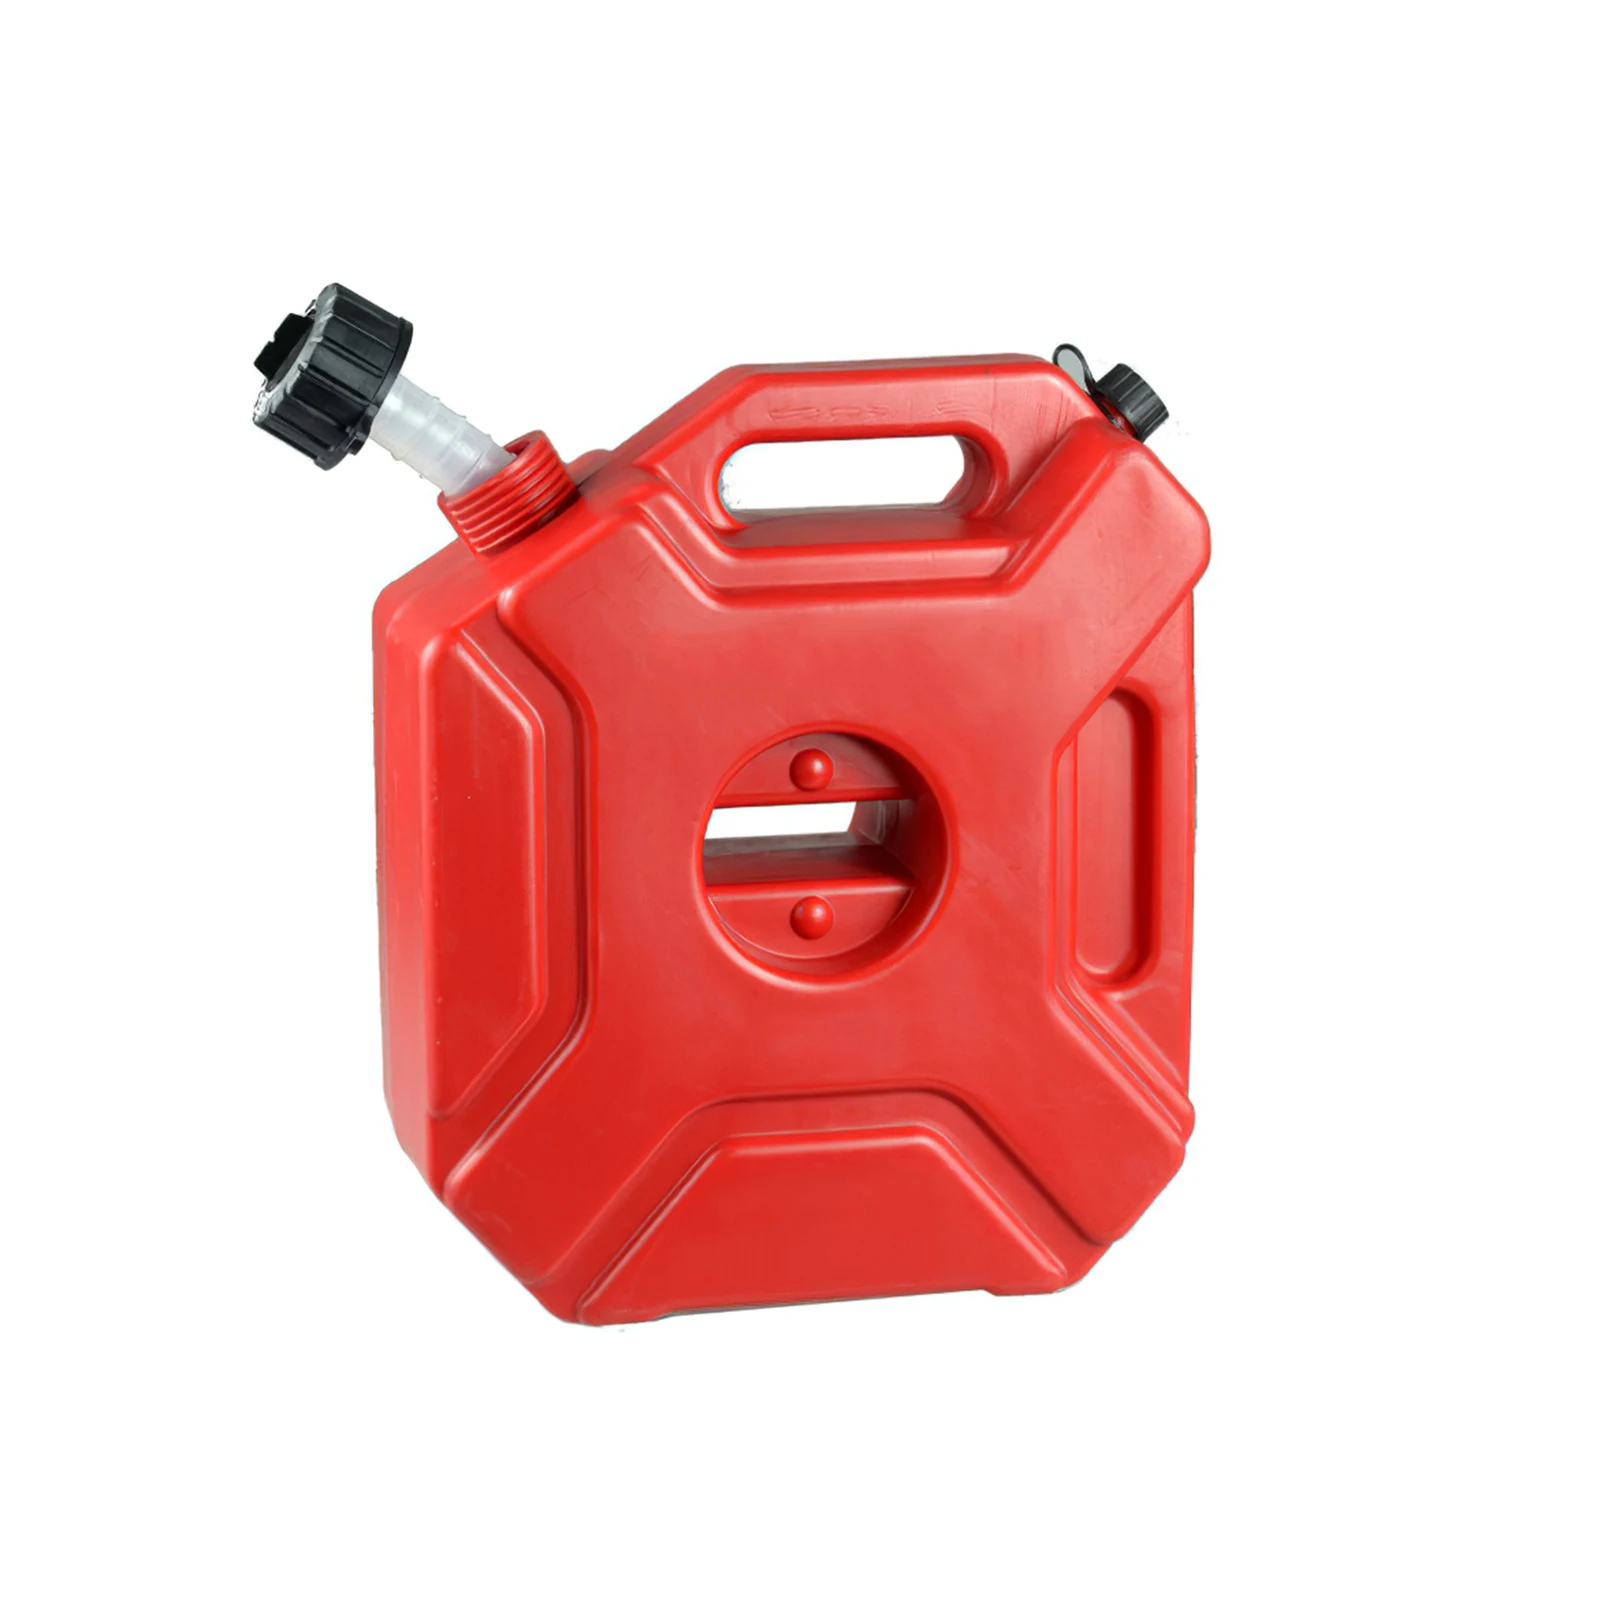 Universal 5L Fuel Tanks Red Anti-Static Plastic Petrol Cans Car Jerry Can Gasoline Oil Container Fuel Canister With Bracket Kit